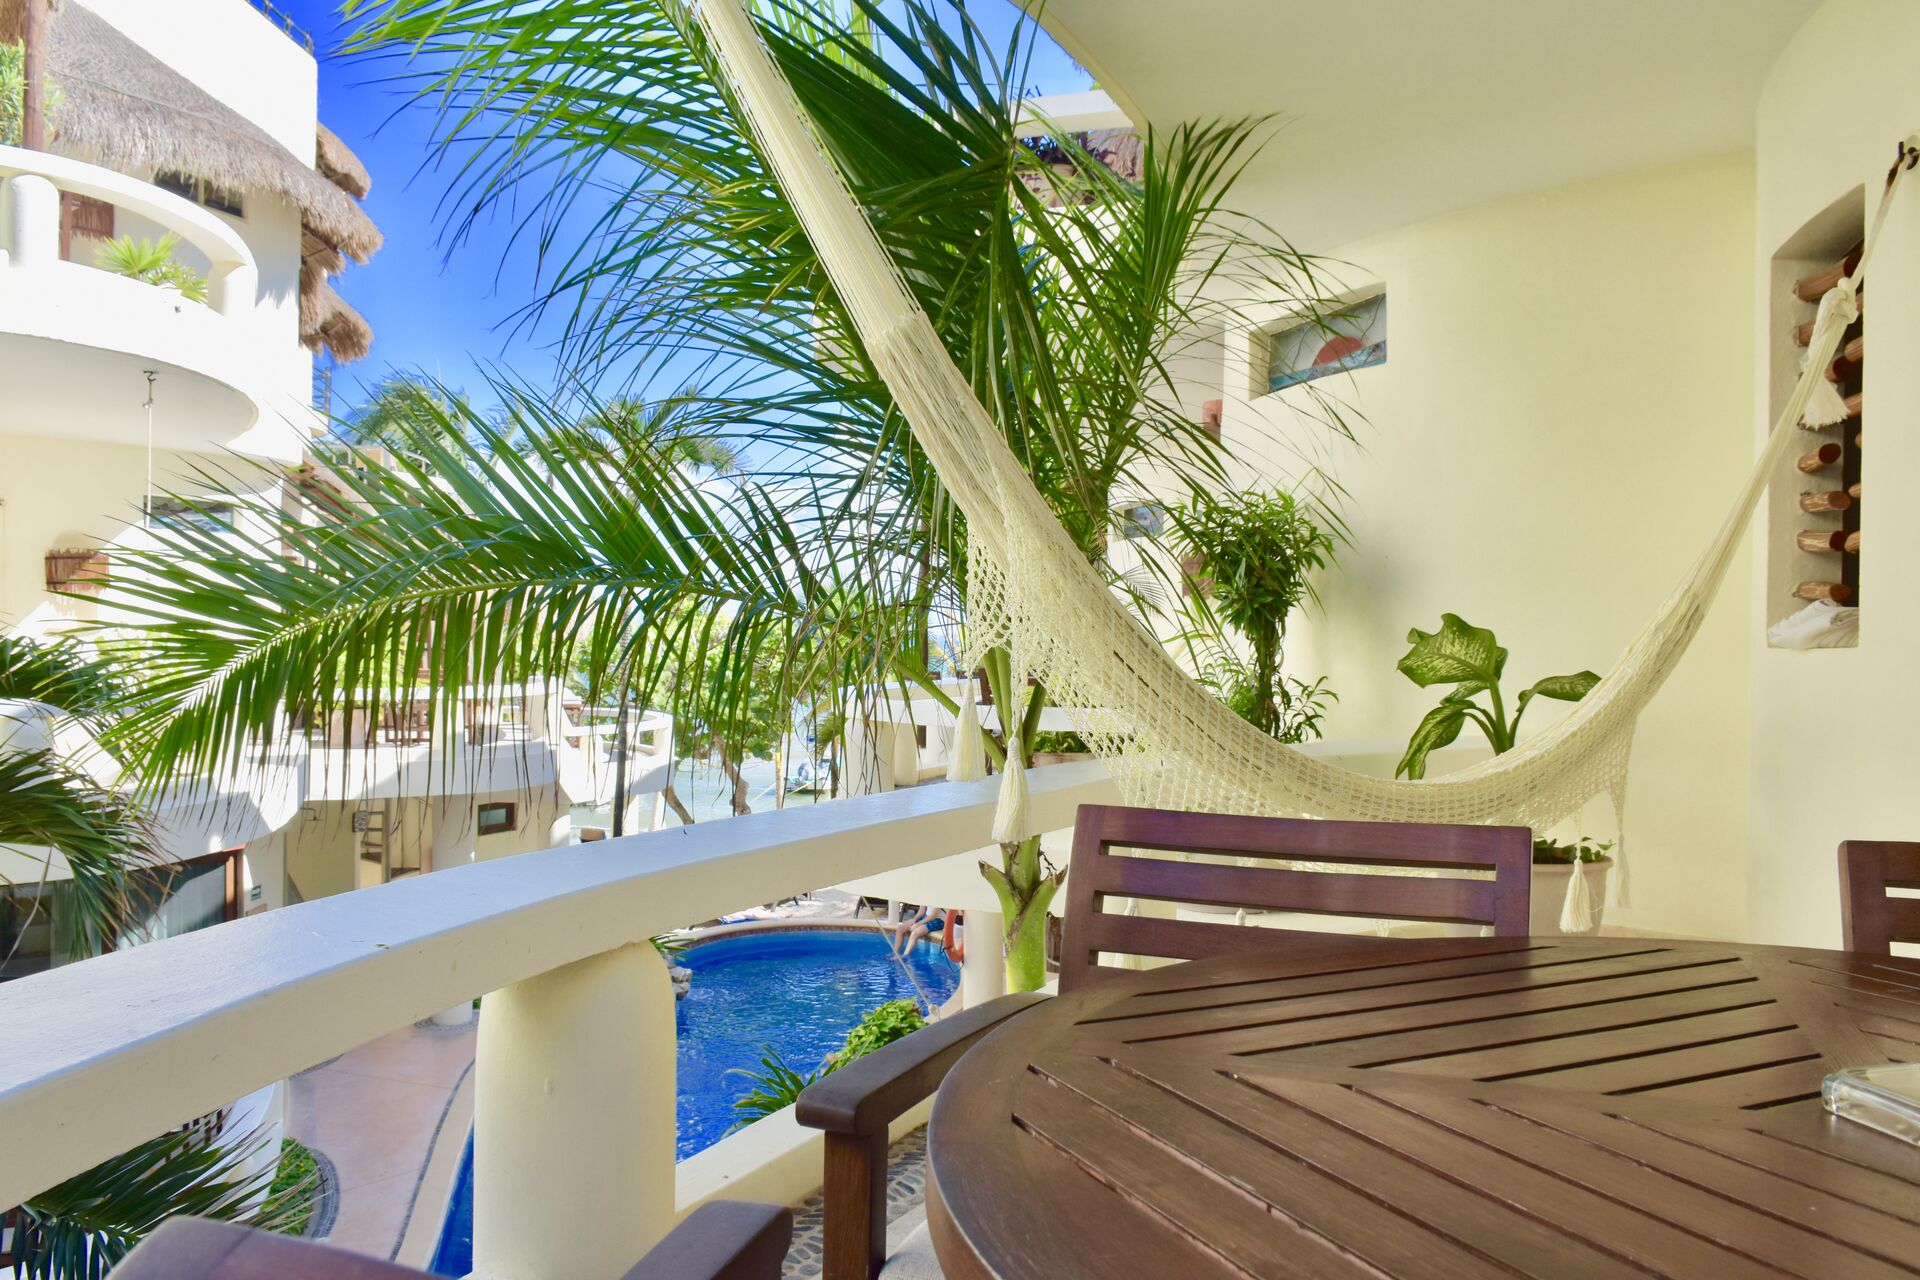 Ocean view balcony with chairs and hammock.Ocean view balcony with chairs and hammock.